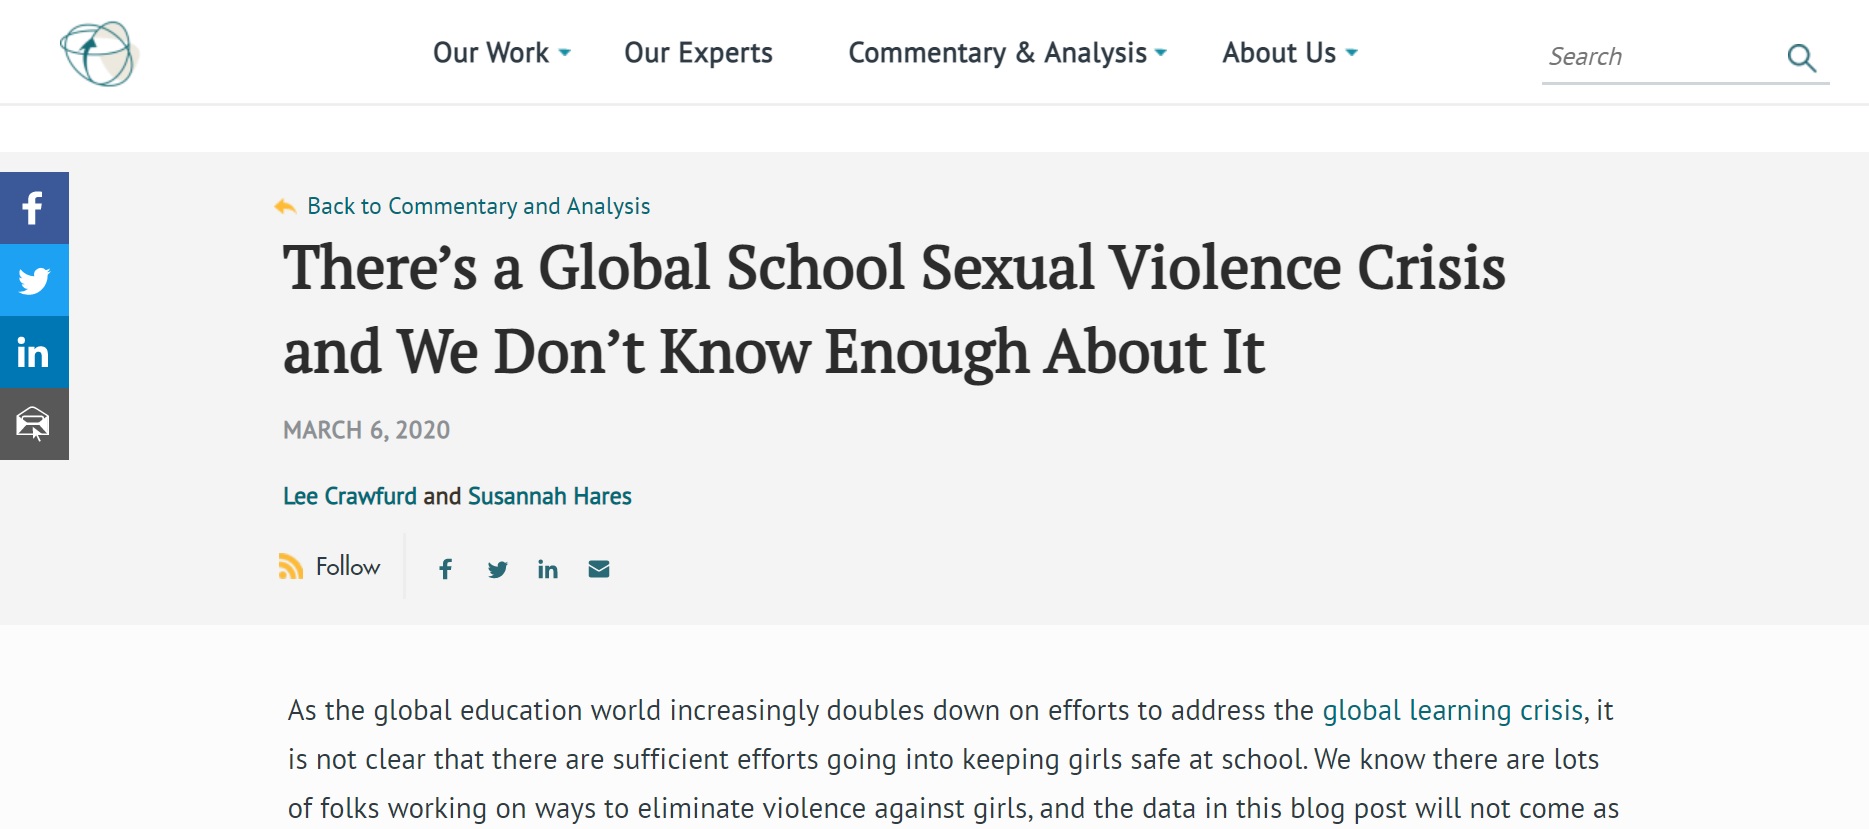 





There’s a Global School Sexual Violence Crisis and We Don’t Know Enough About It



